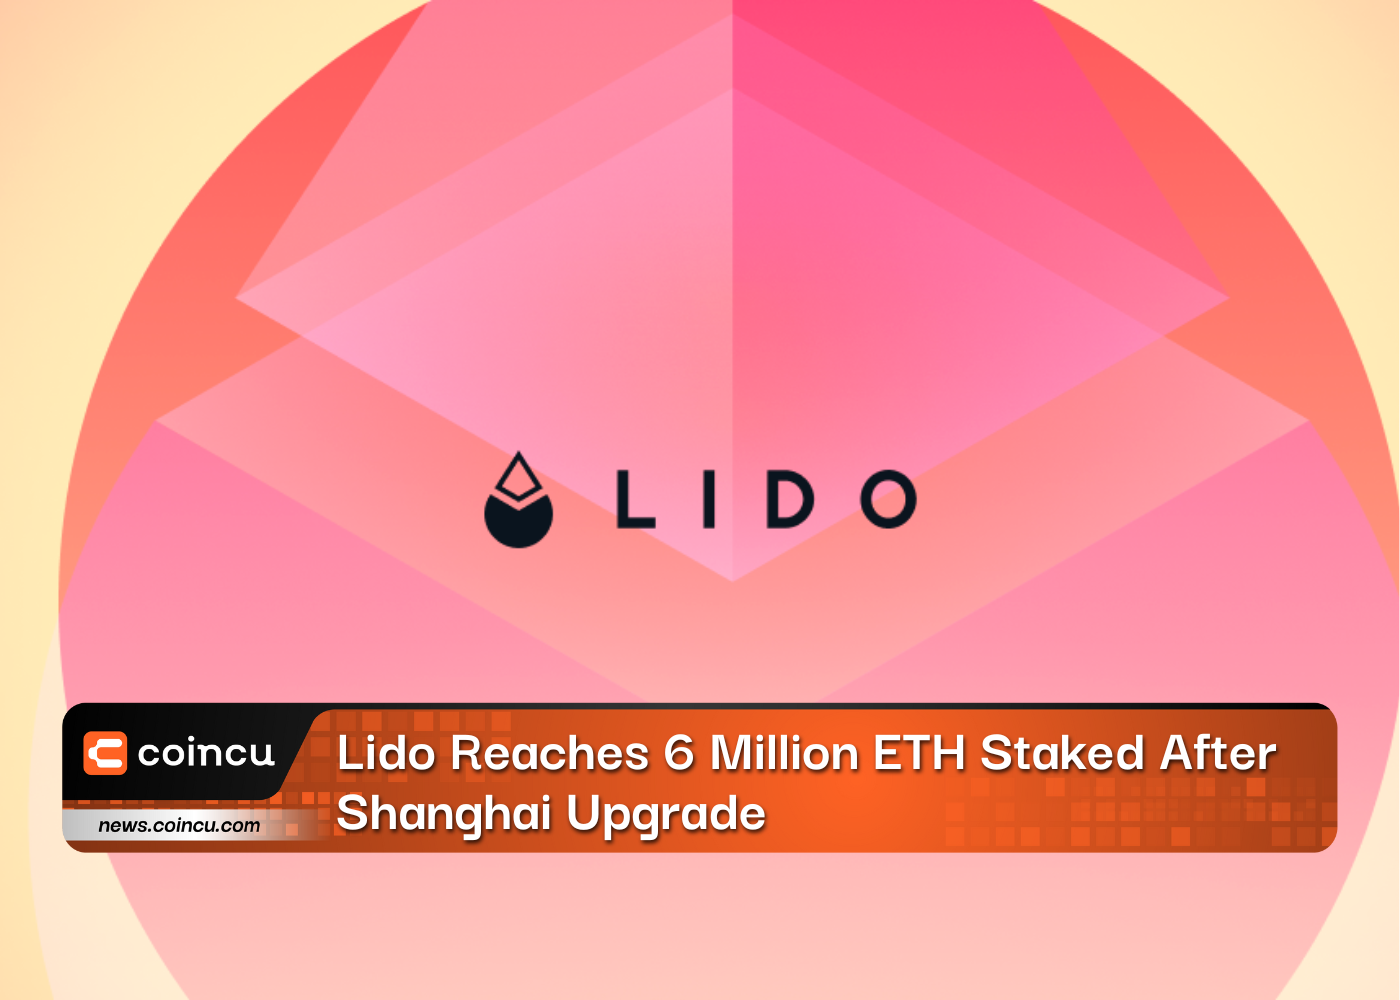 Lido Reaches 6 Million ETH Staked After Shanghai Upgrade